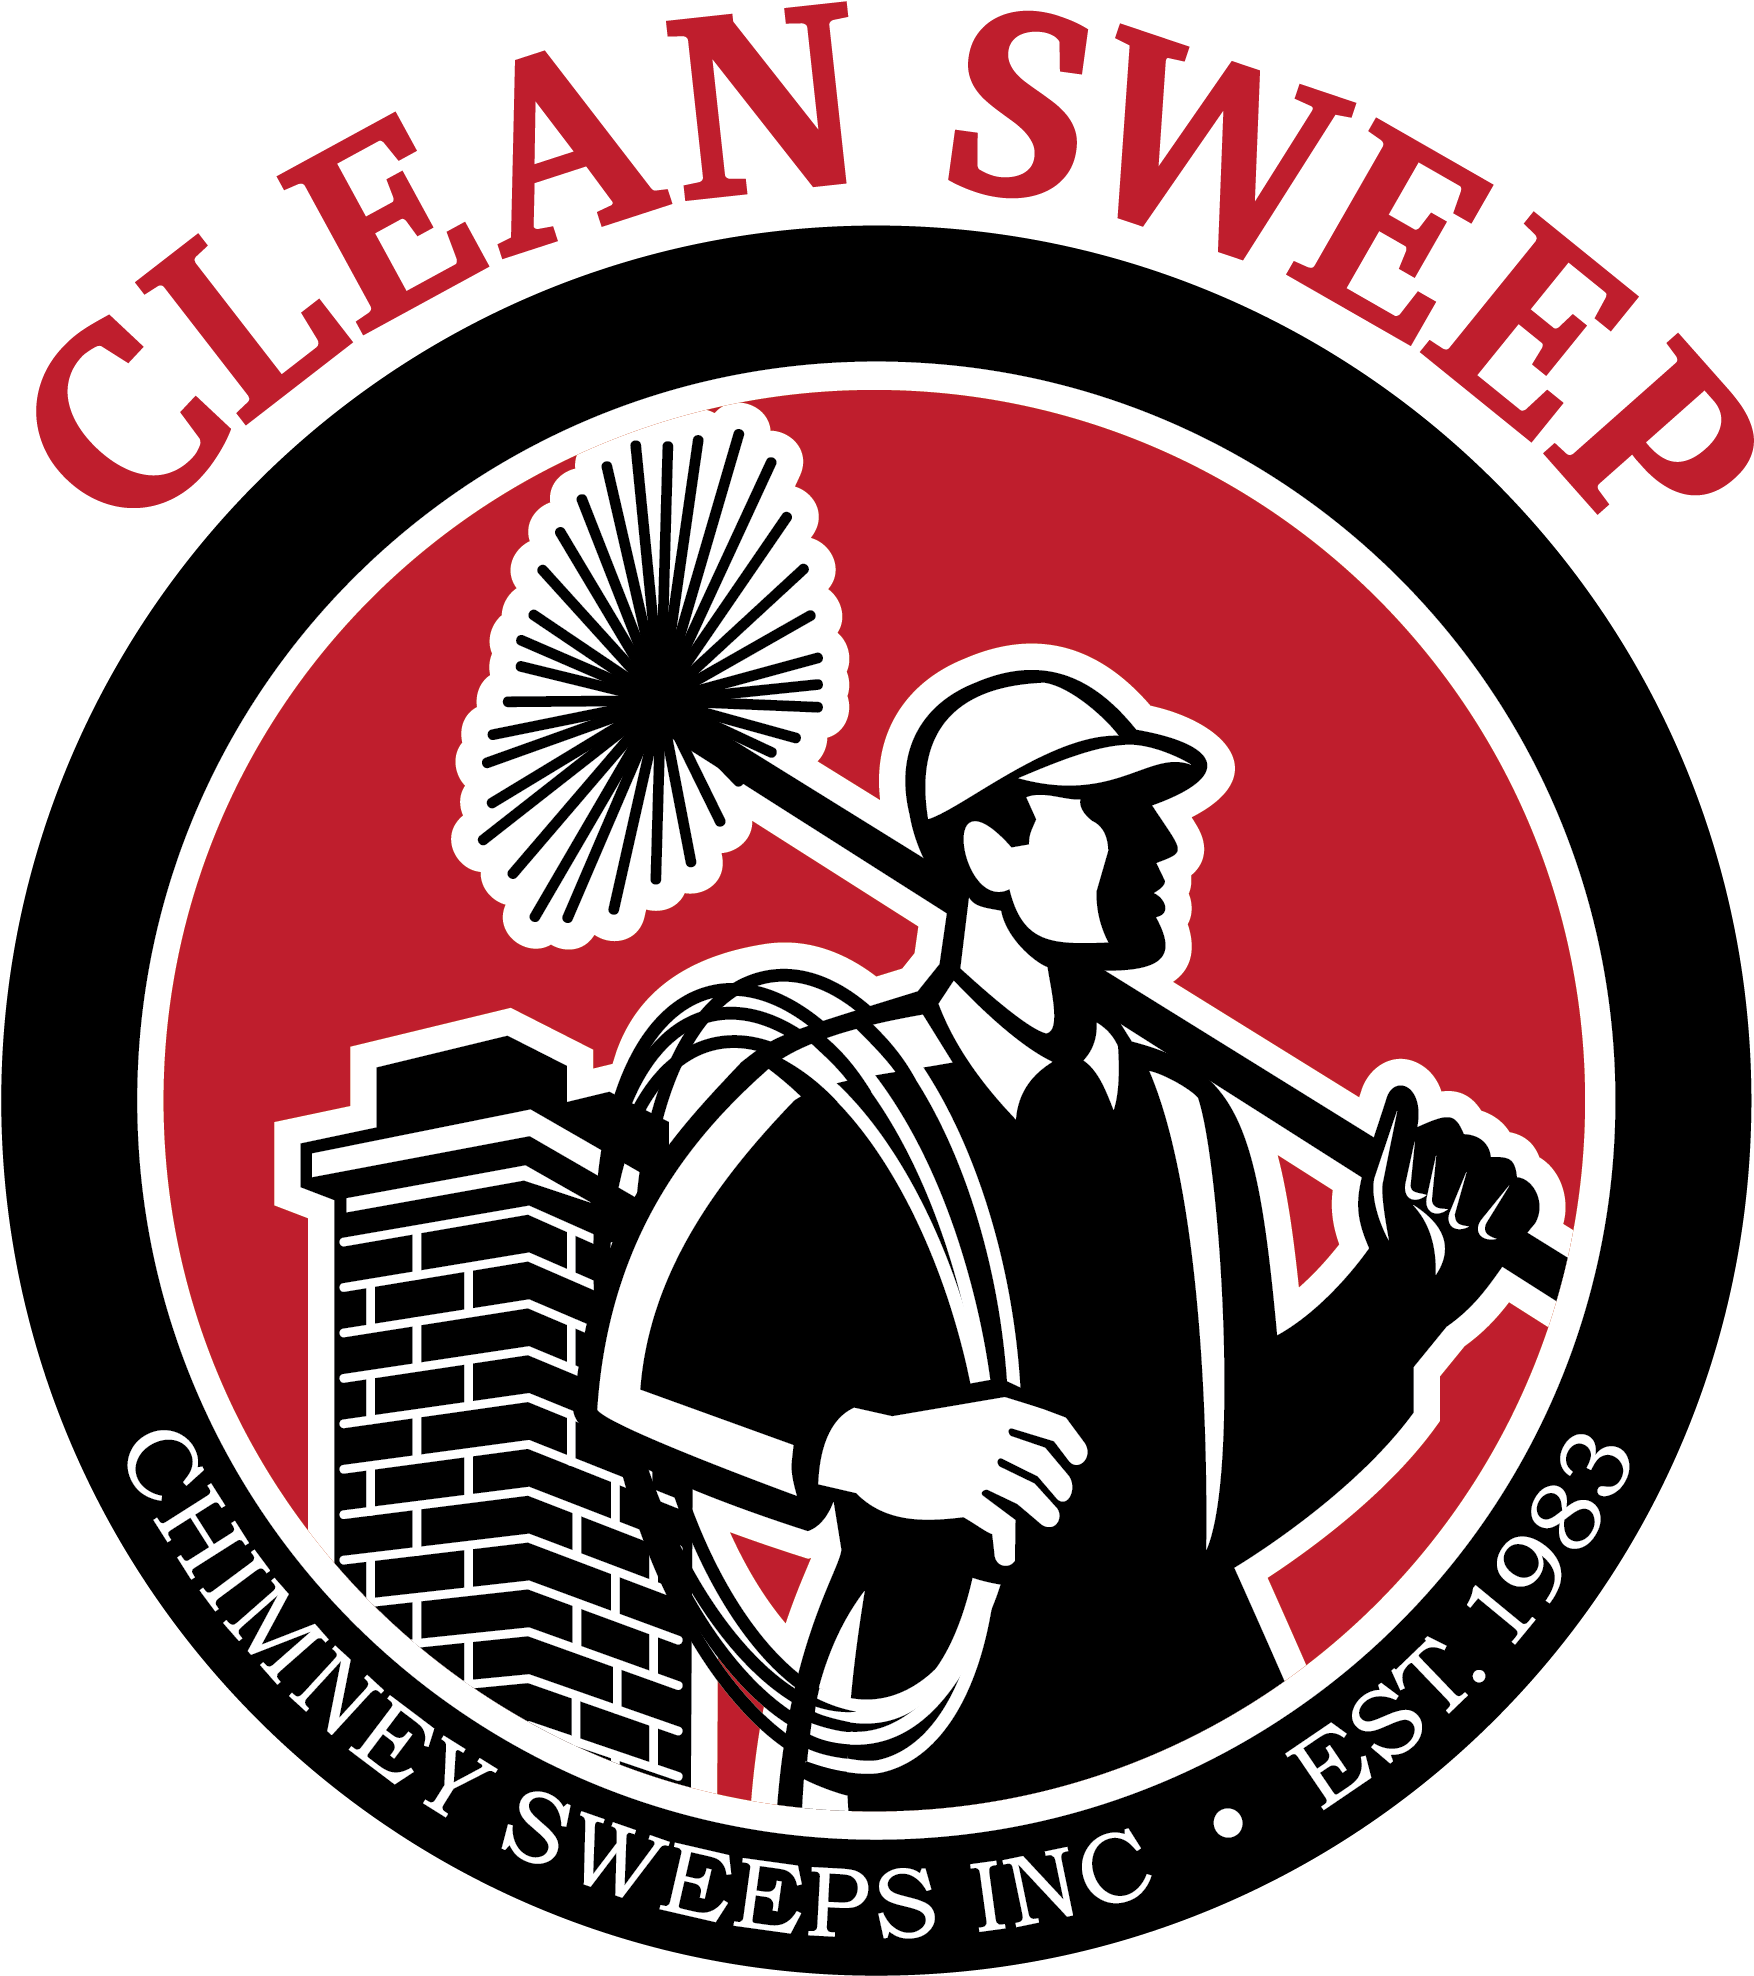 Chimney Sweeper Worker Retro Card (2550x2321)